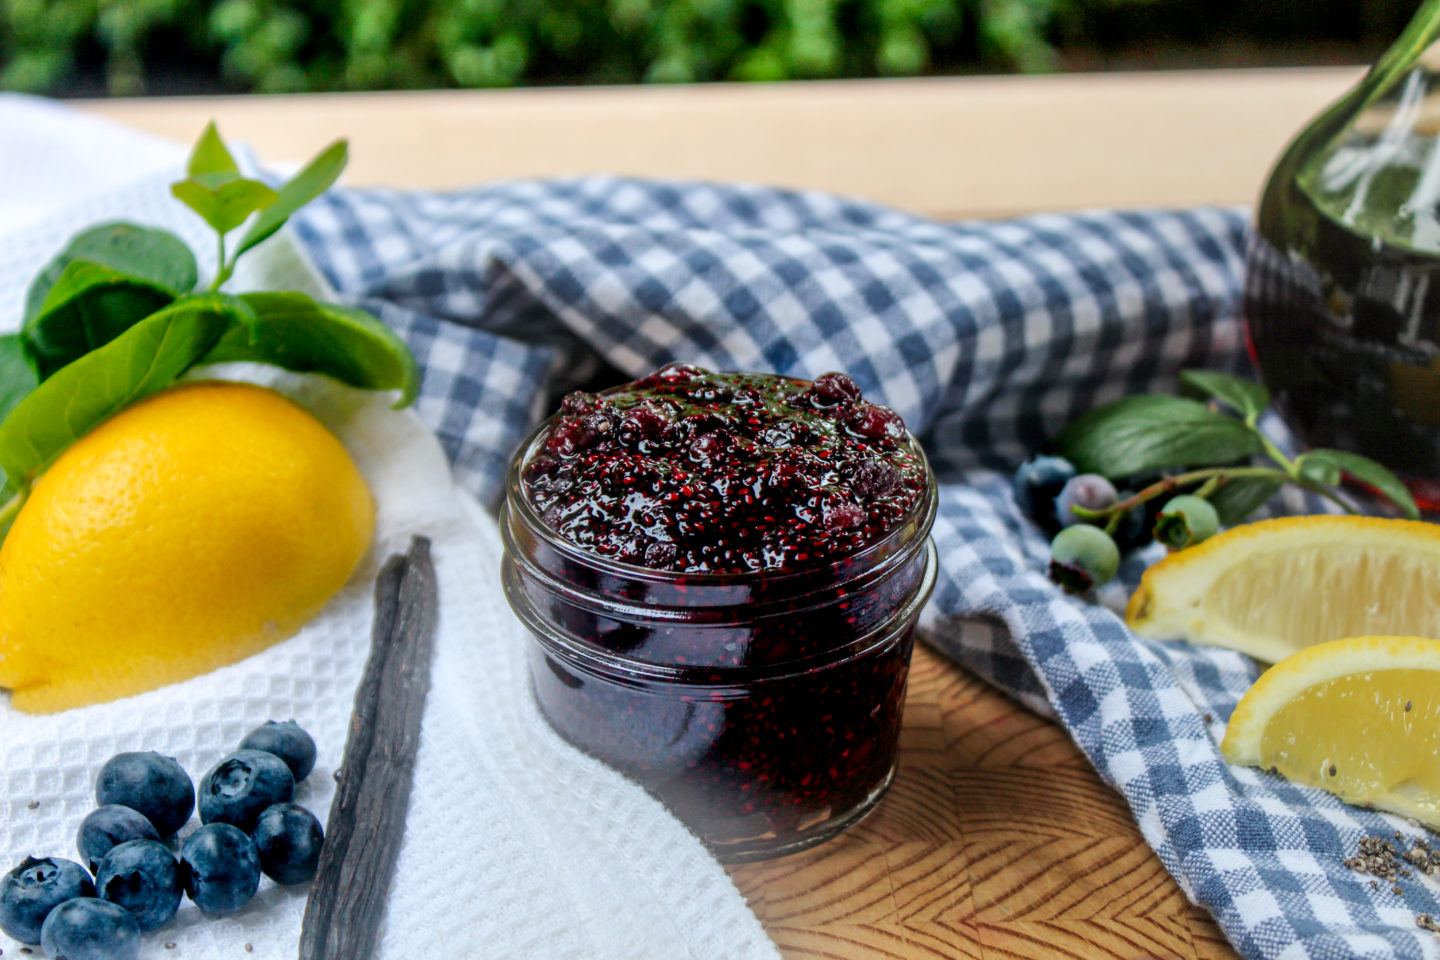 How To Make Blueberry Chia Seed Jam